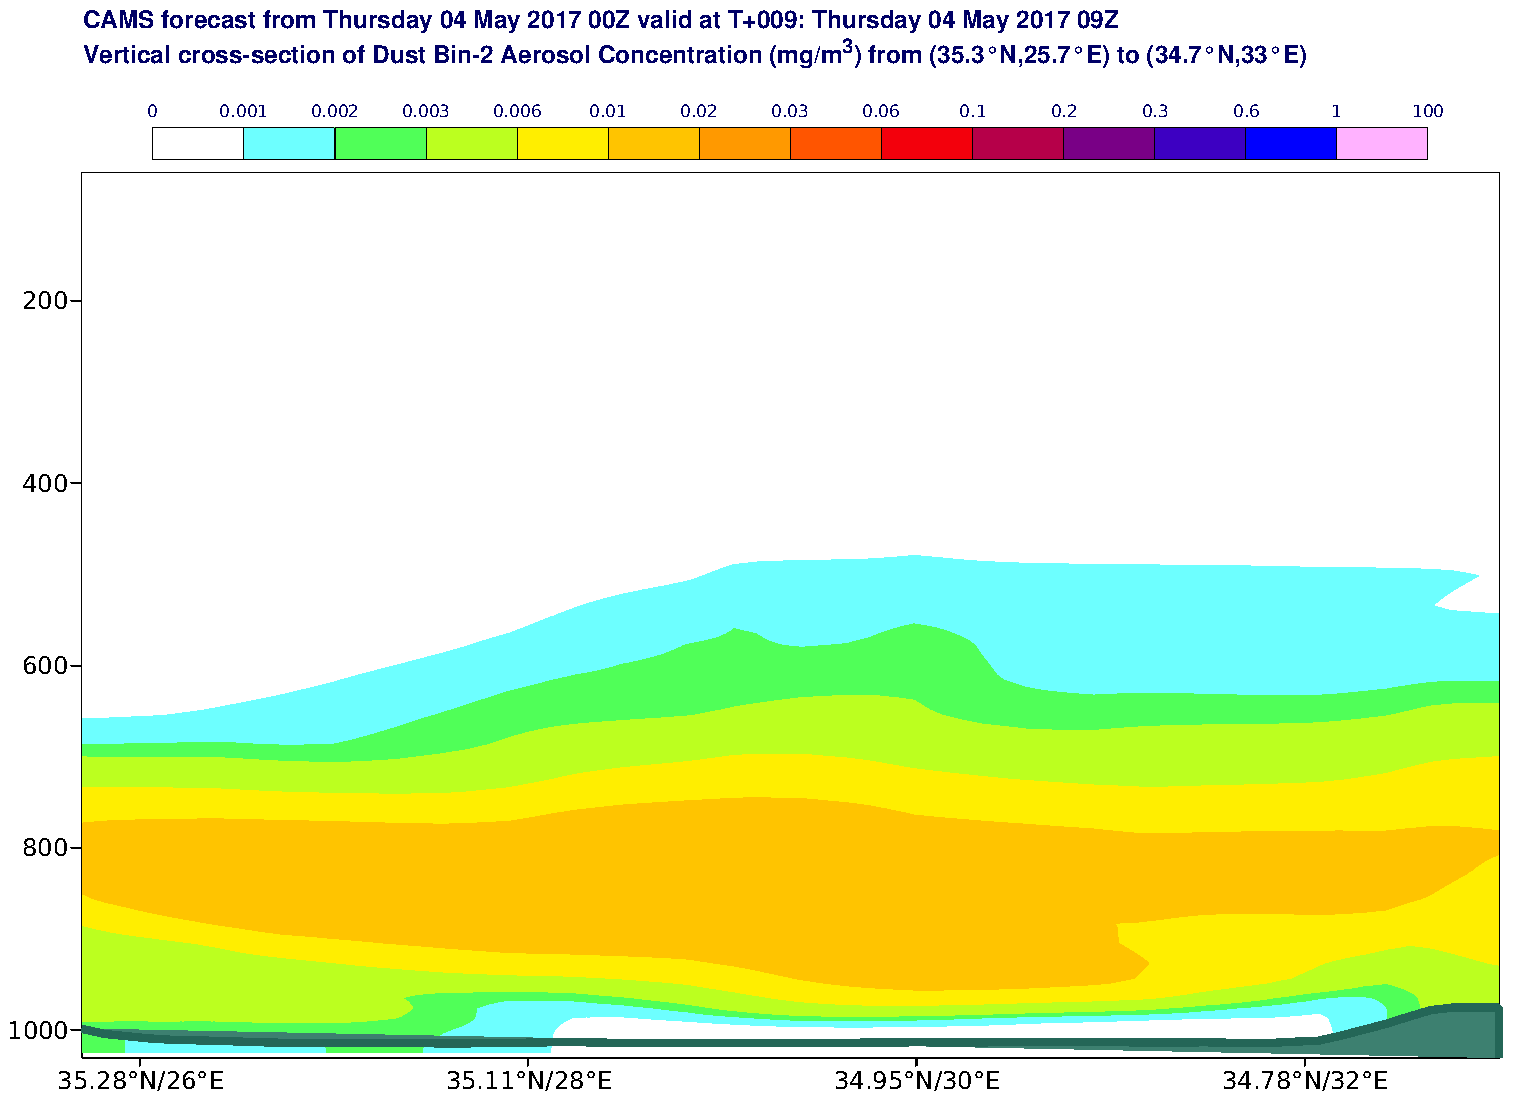 Vertical cross-section of Dust Bin-2 Aerosol Concentration (mg/m3) valid at T9 - 2017-05-04 09:00